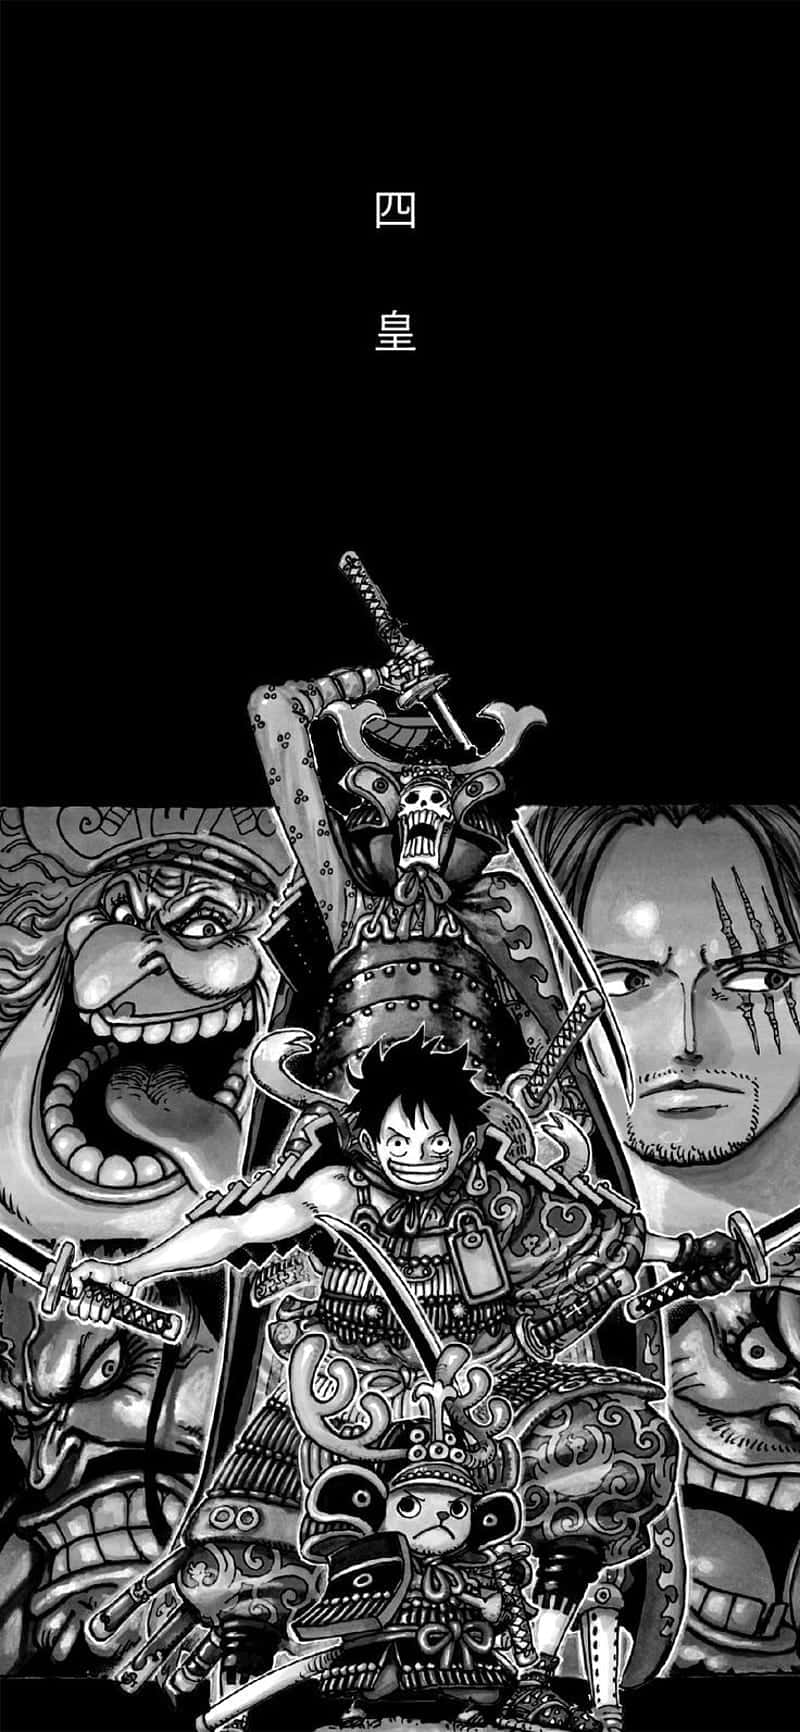 An iconic moment from the popular anime series One Piece Wallpaper